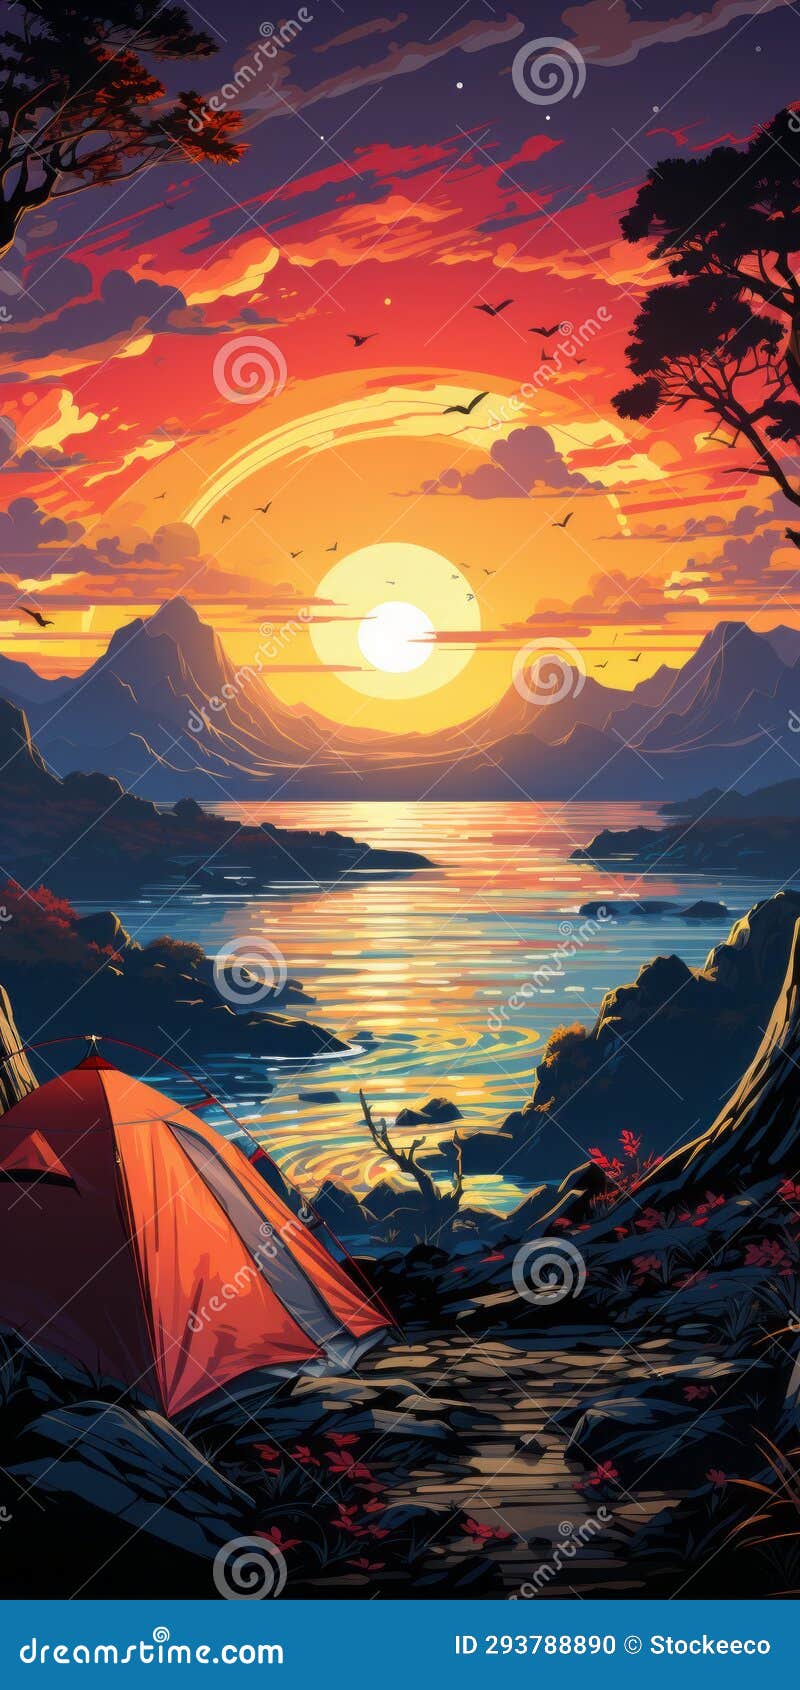 vibrant retrovirus camping poster with scenic reef view